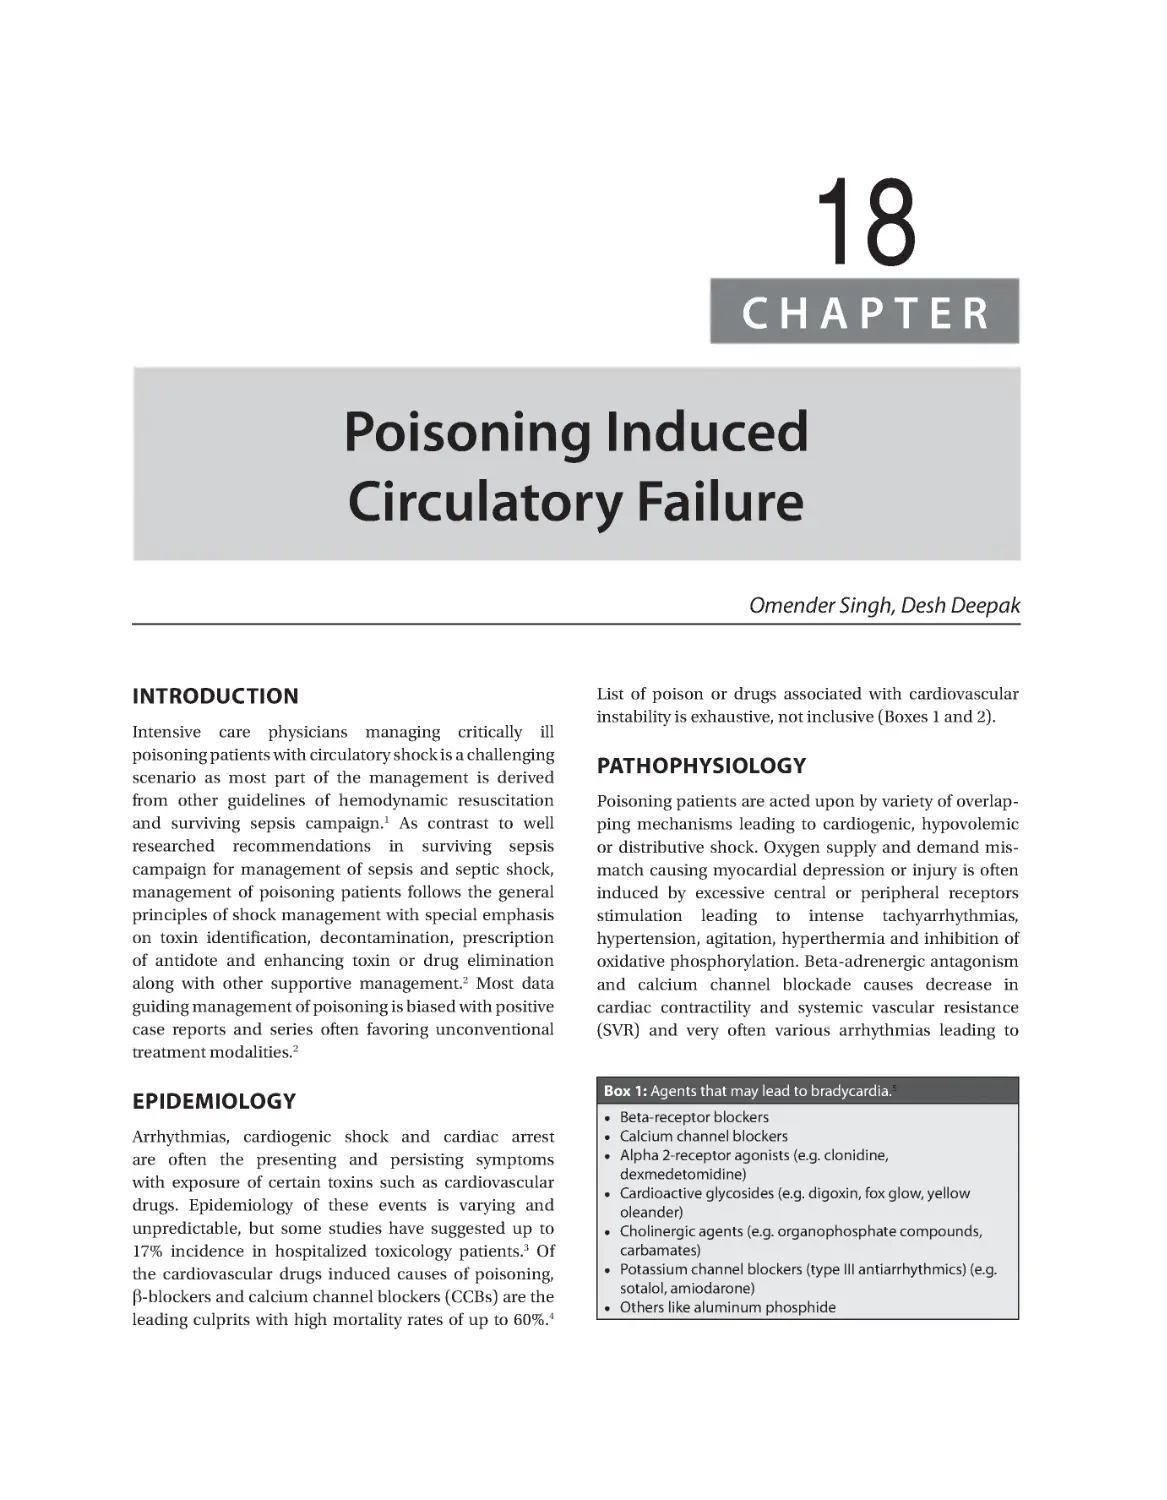 Chapter 18: Poisoning Induced Circulatory Failure